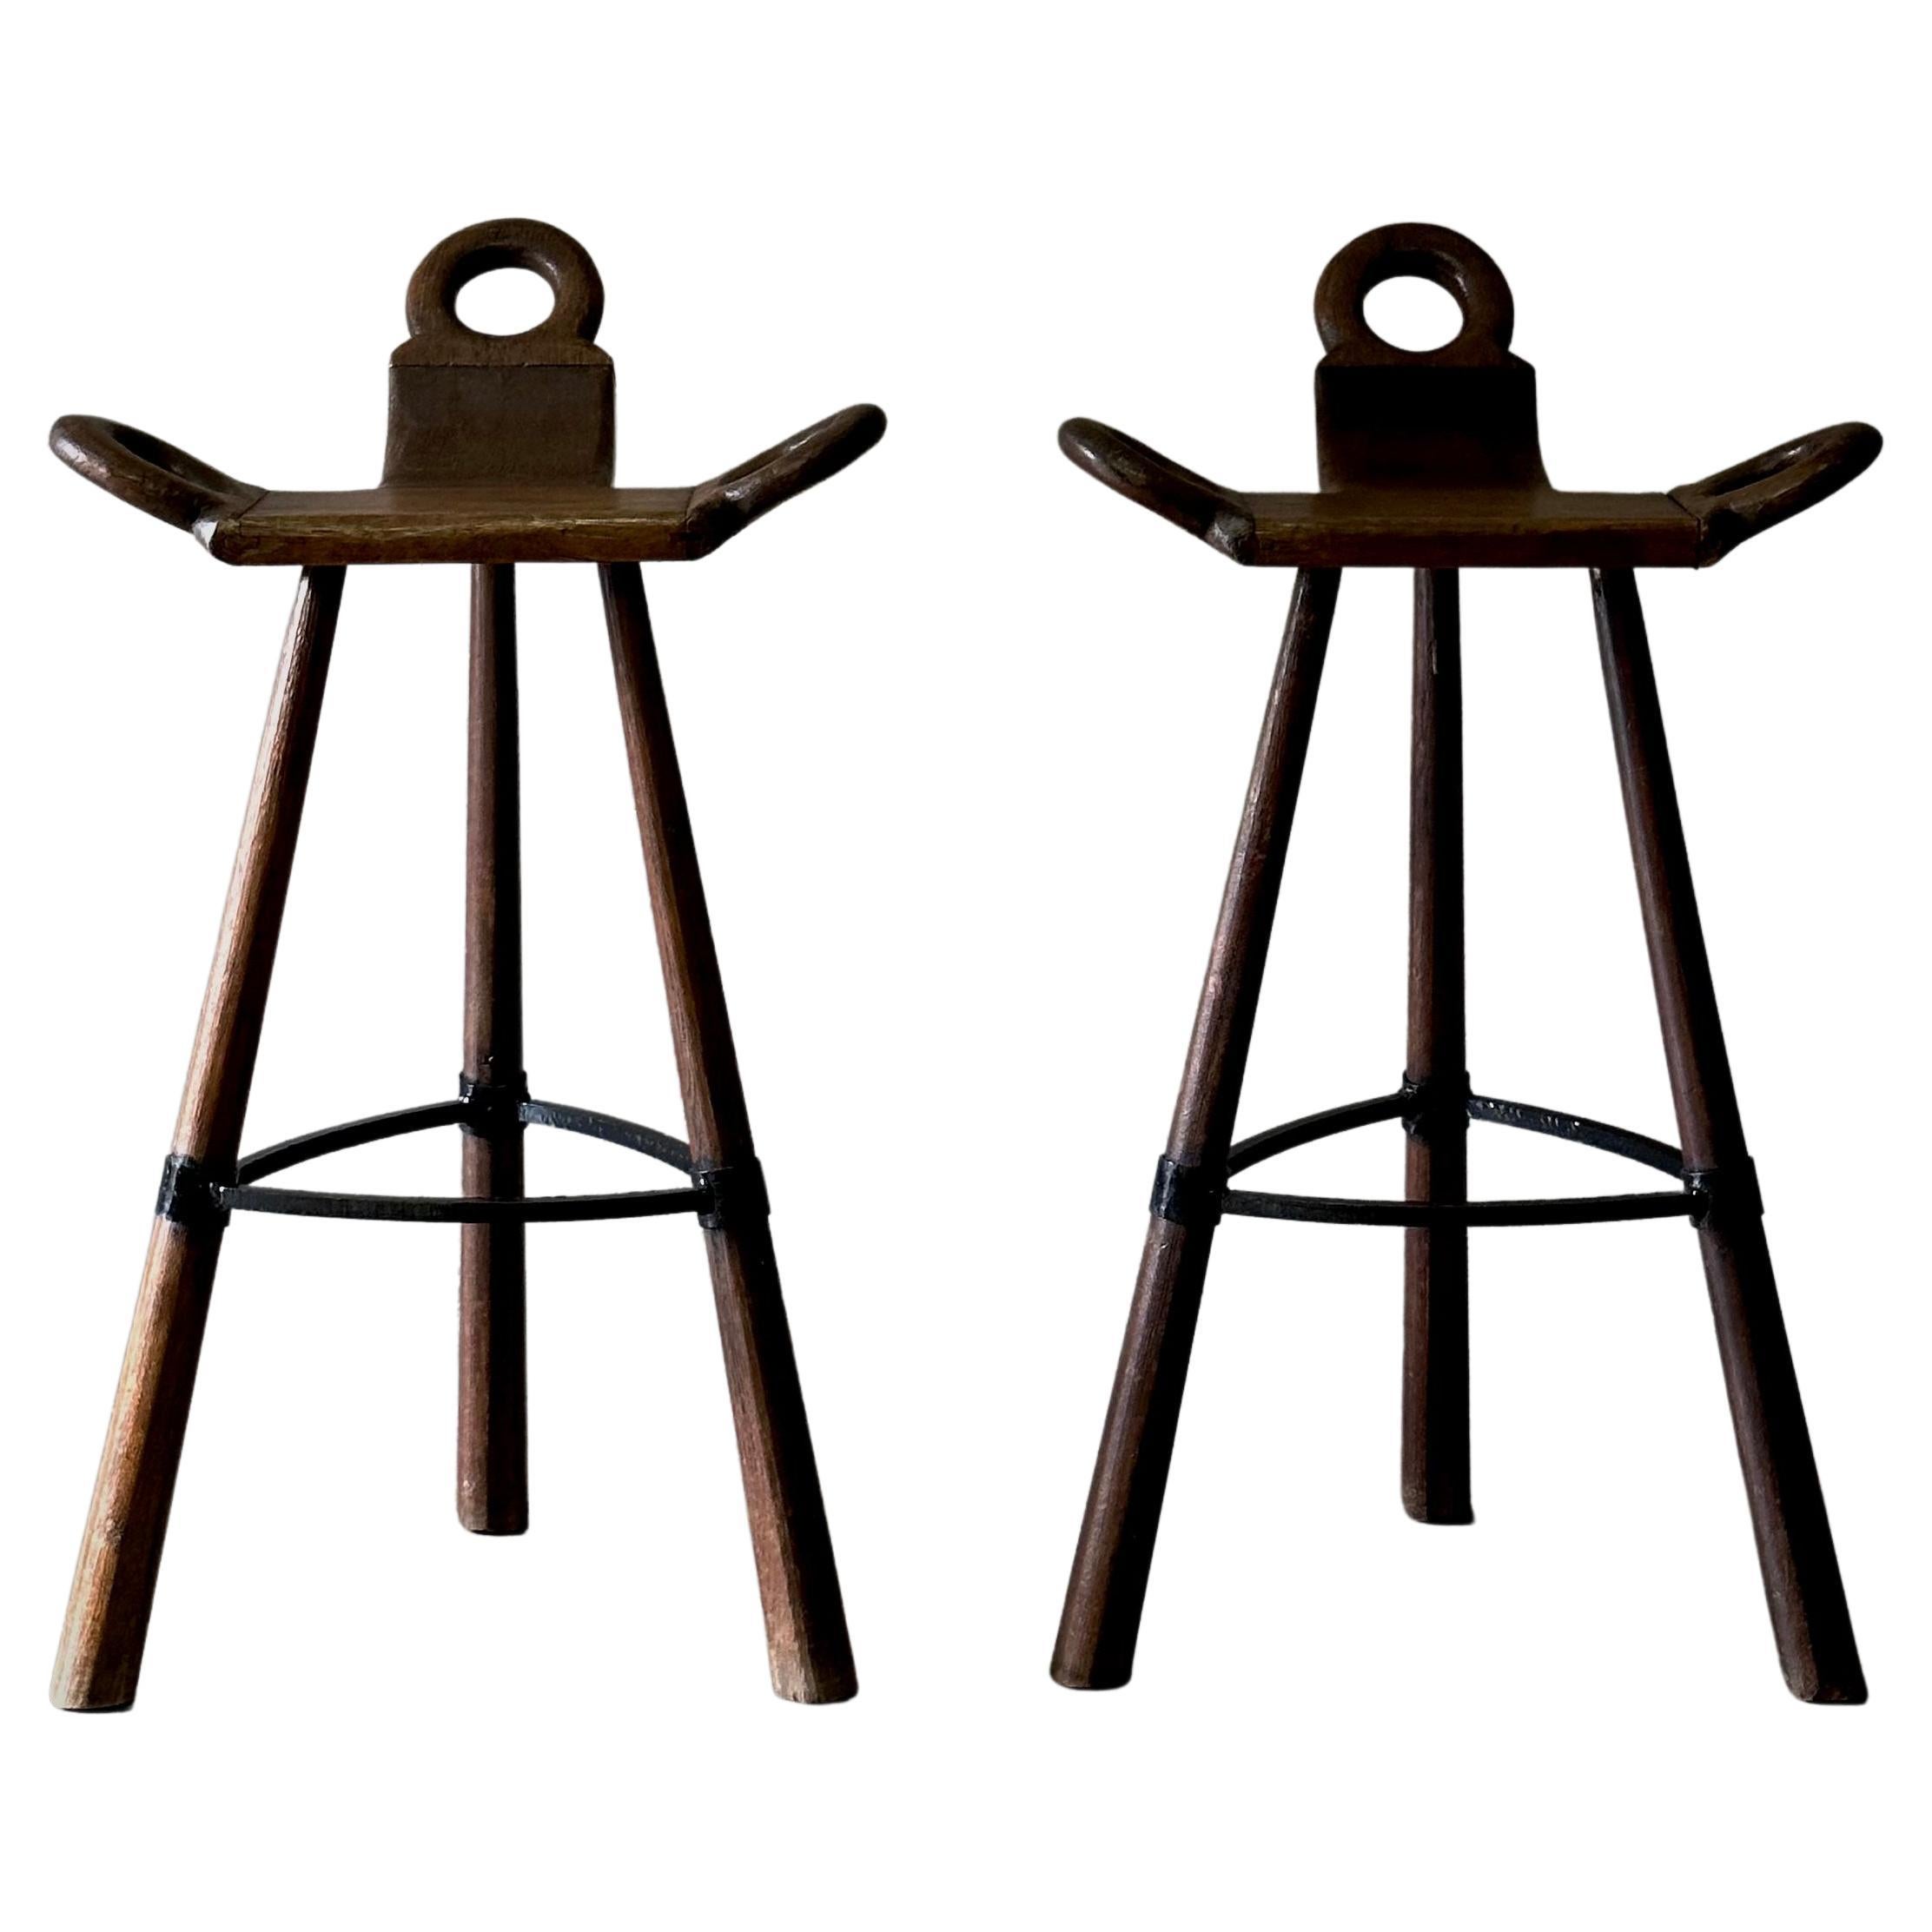 Pair of 1940s Spanish Leather Stools